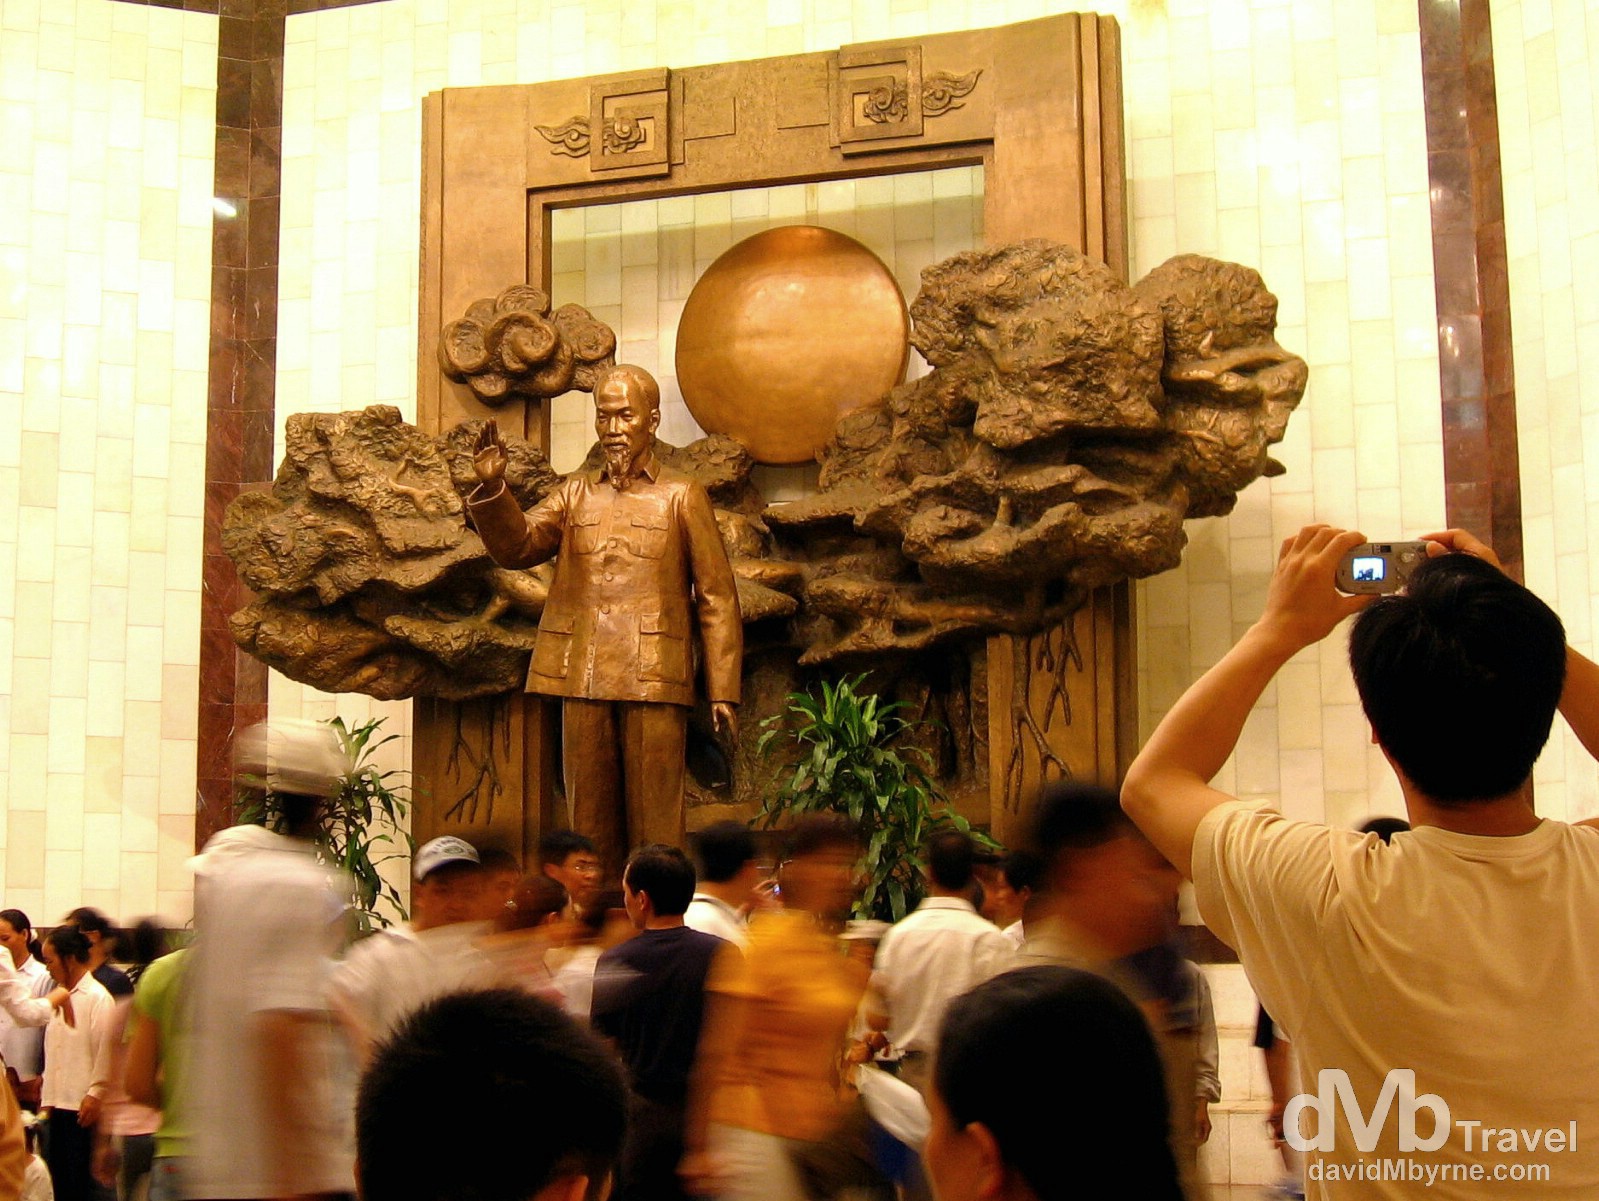 The lobby of the Ho Chi Minh Museum in Hanoi, Vietnam. September 6th, 2005.